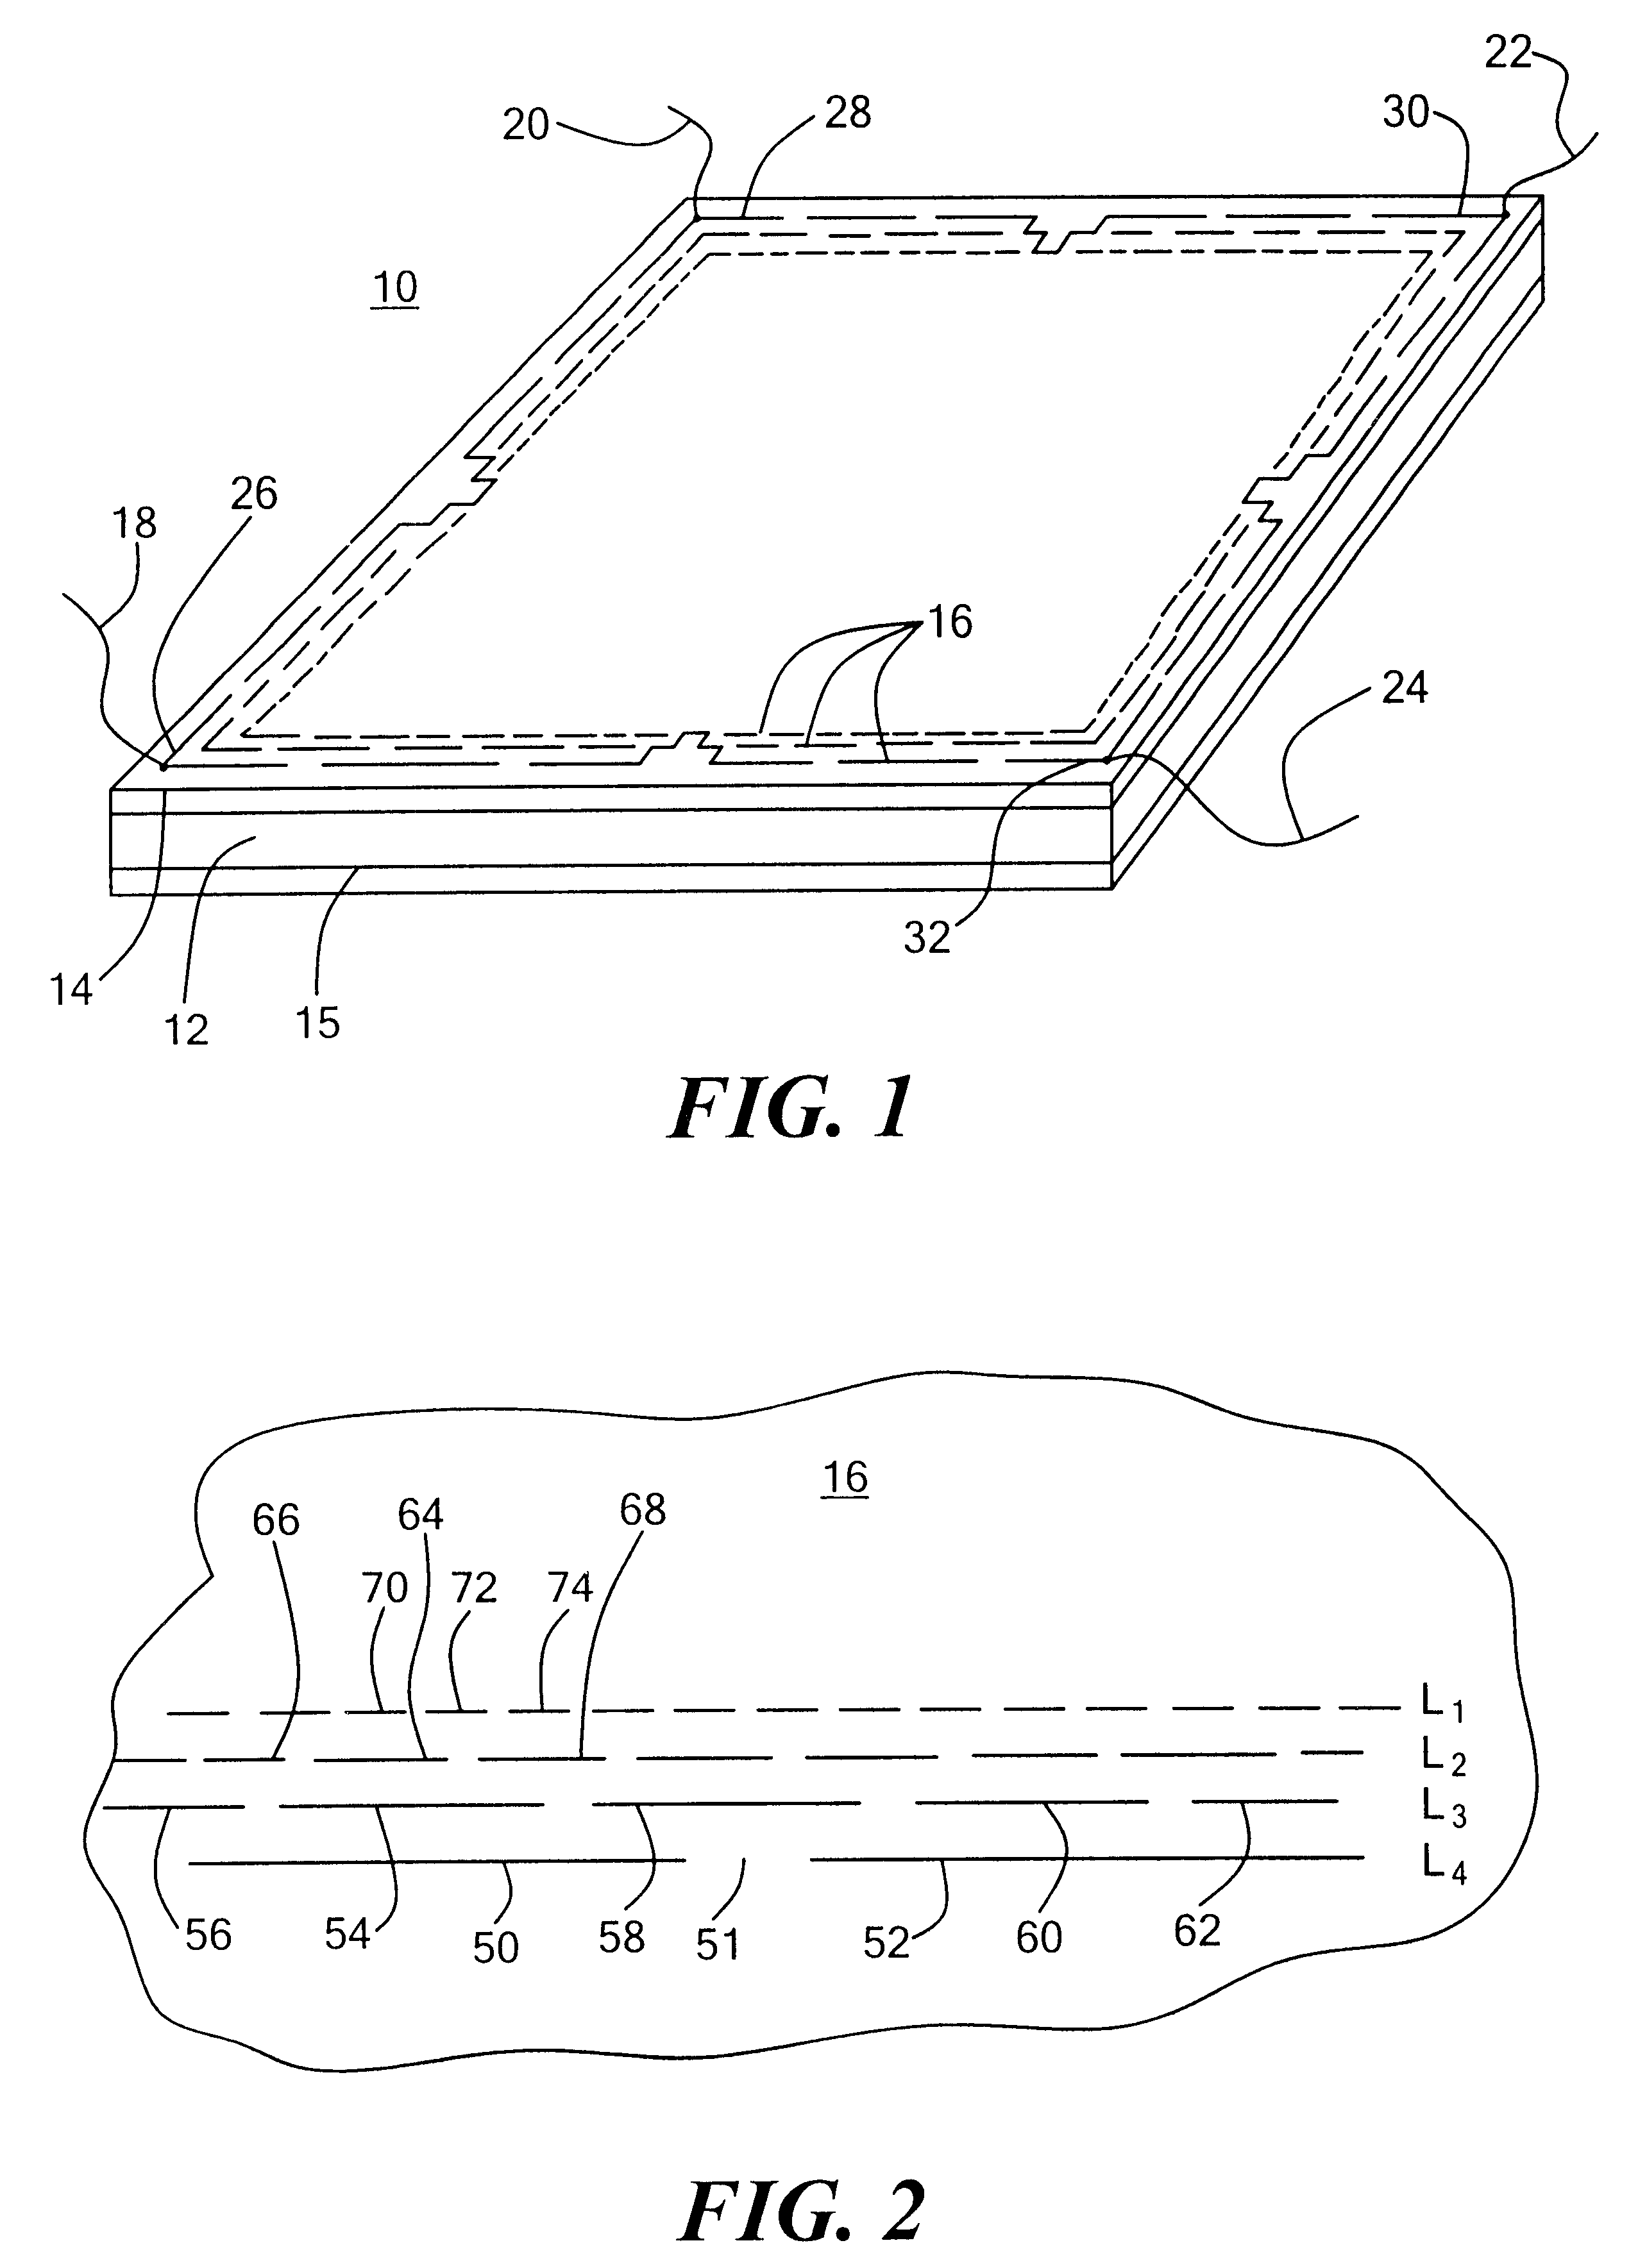 Touch panel with improved linear response and minimal border width electrode pattern